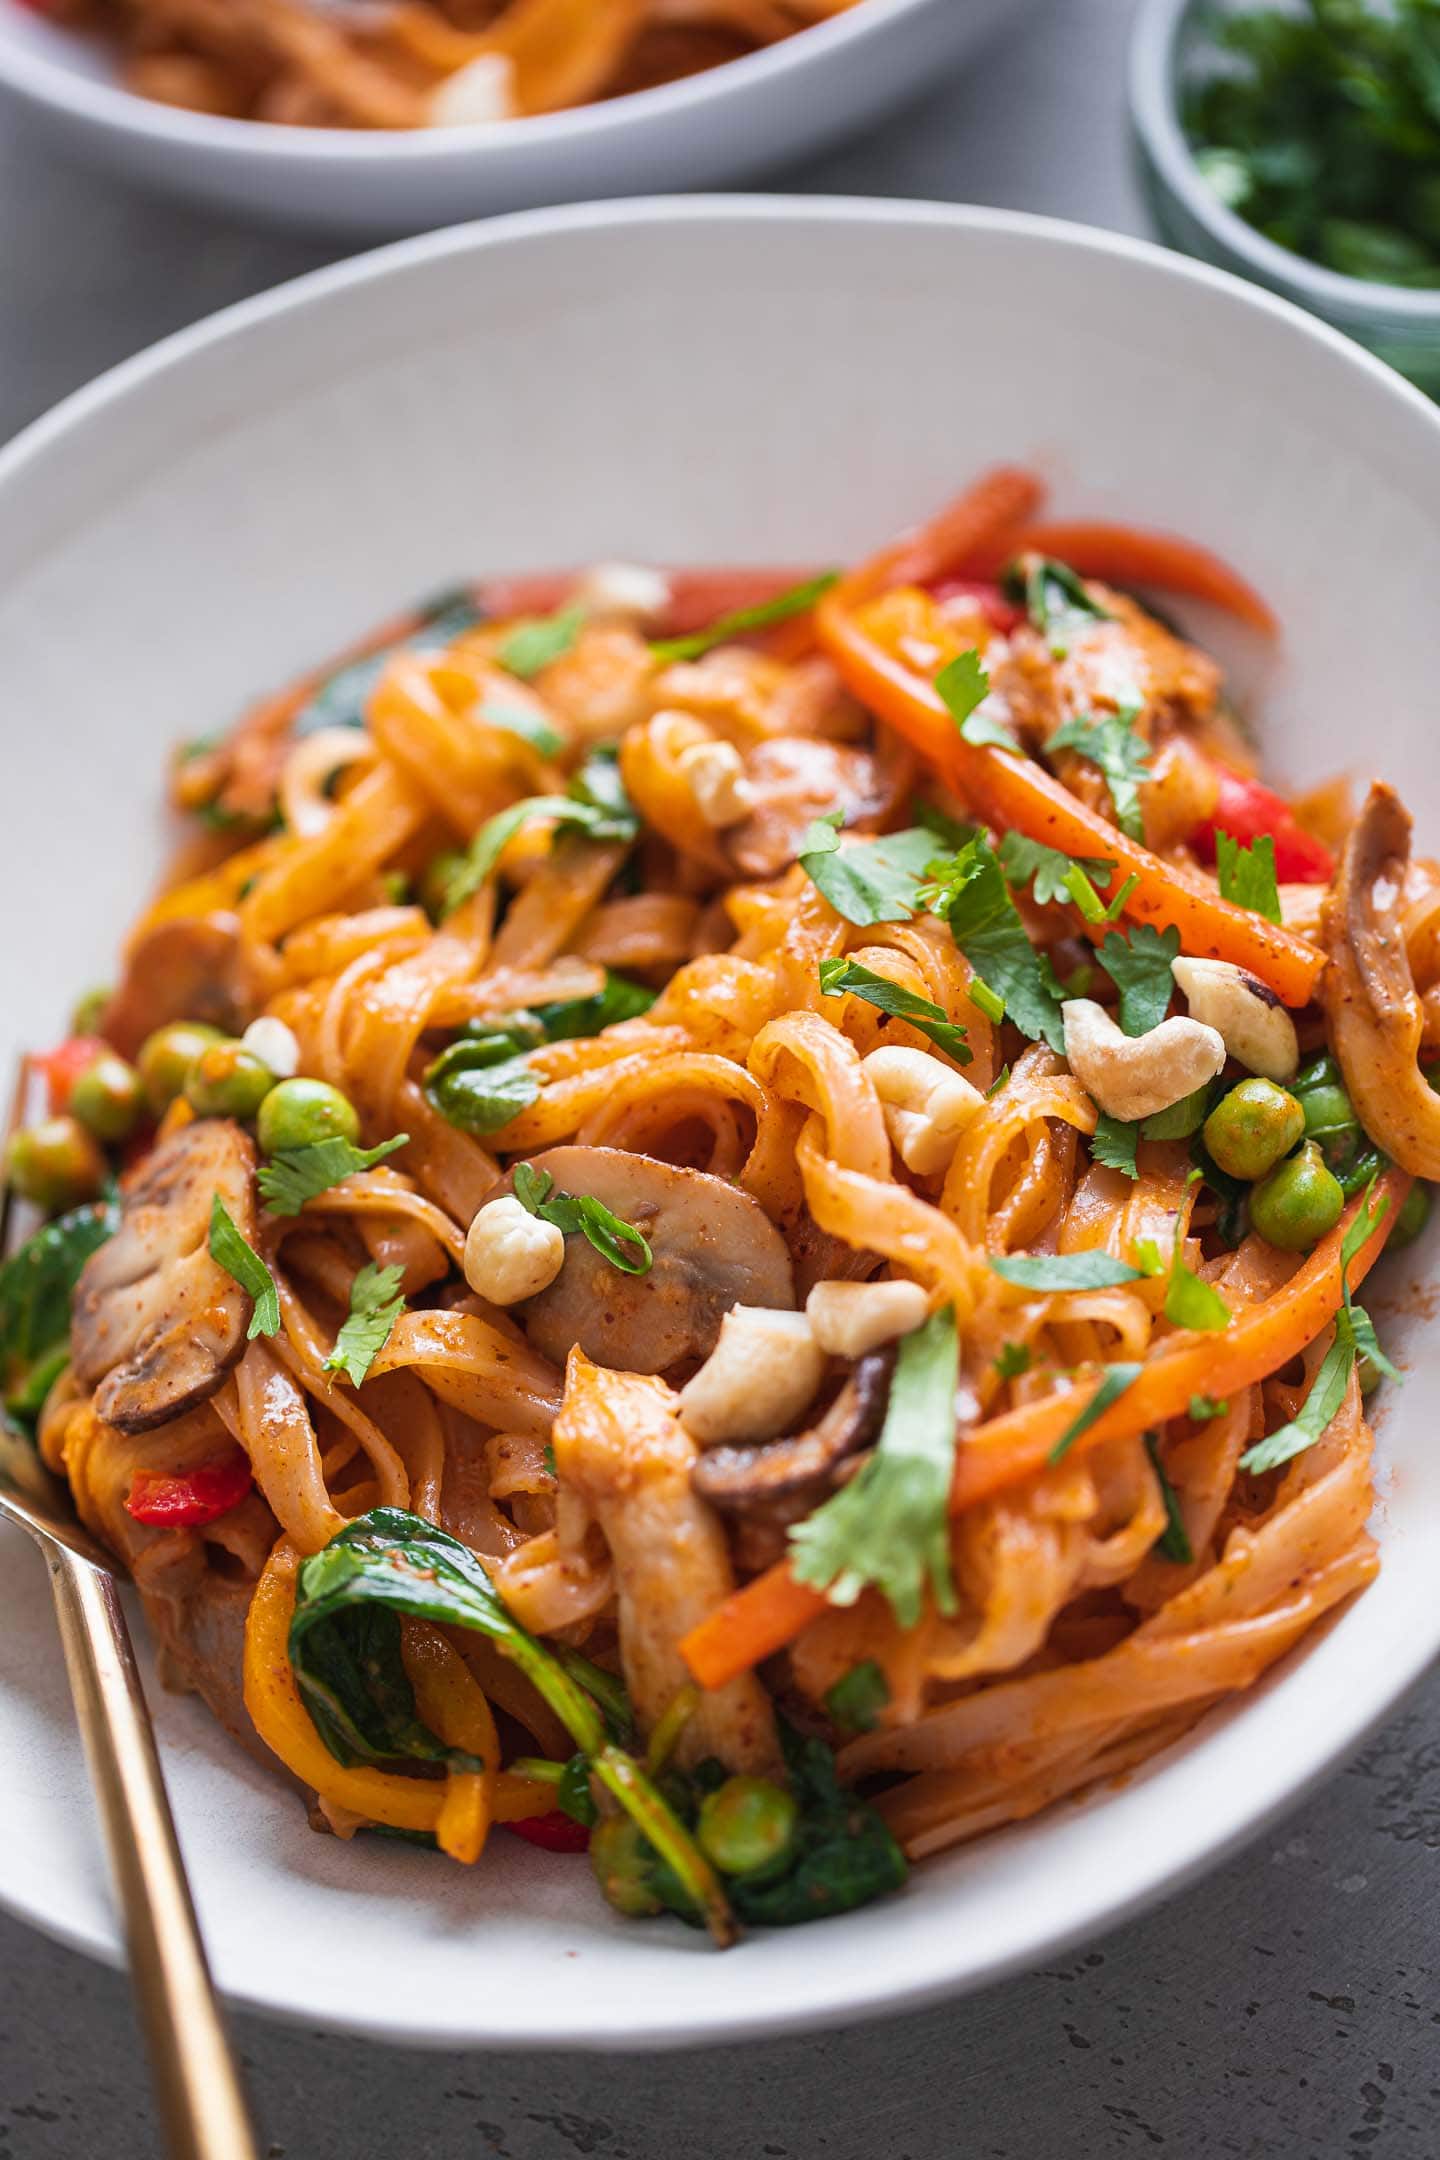 Coconut vegetable stir-fry with rice noodles